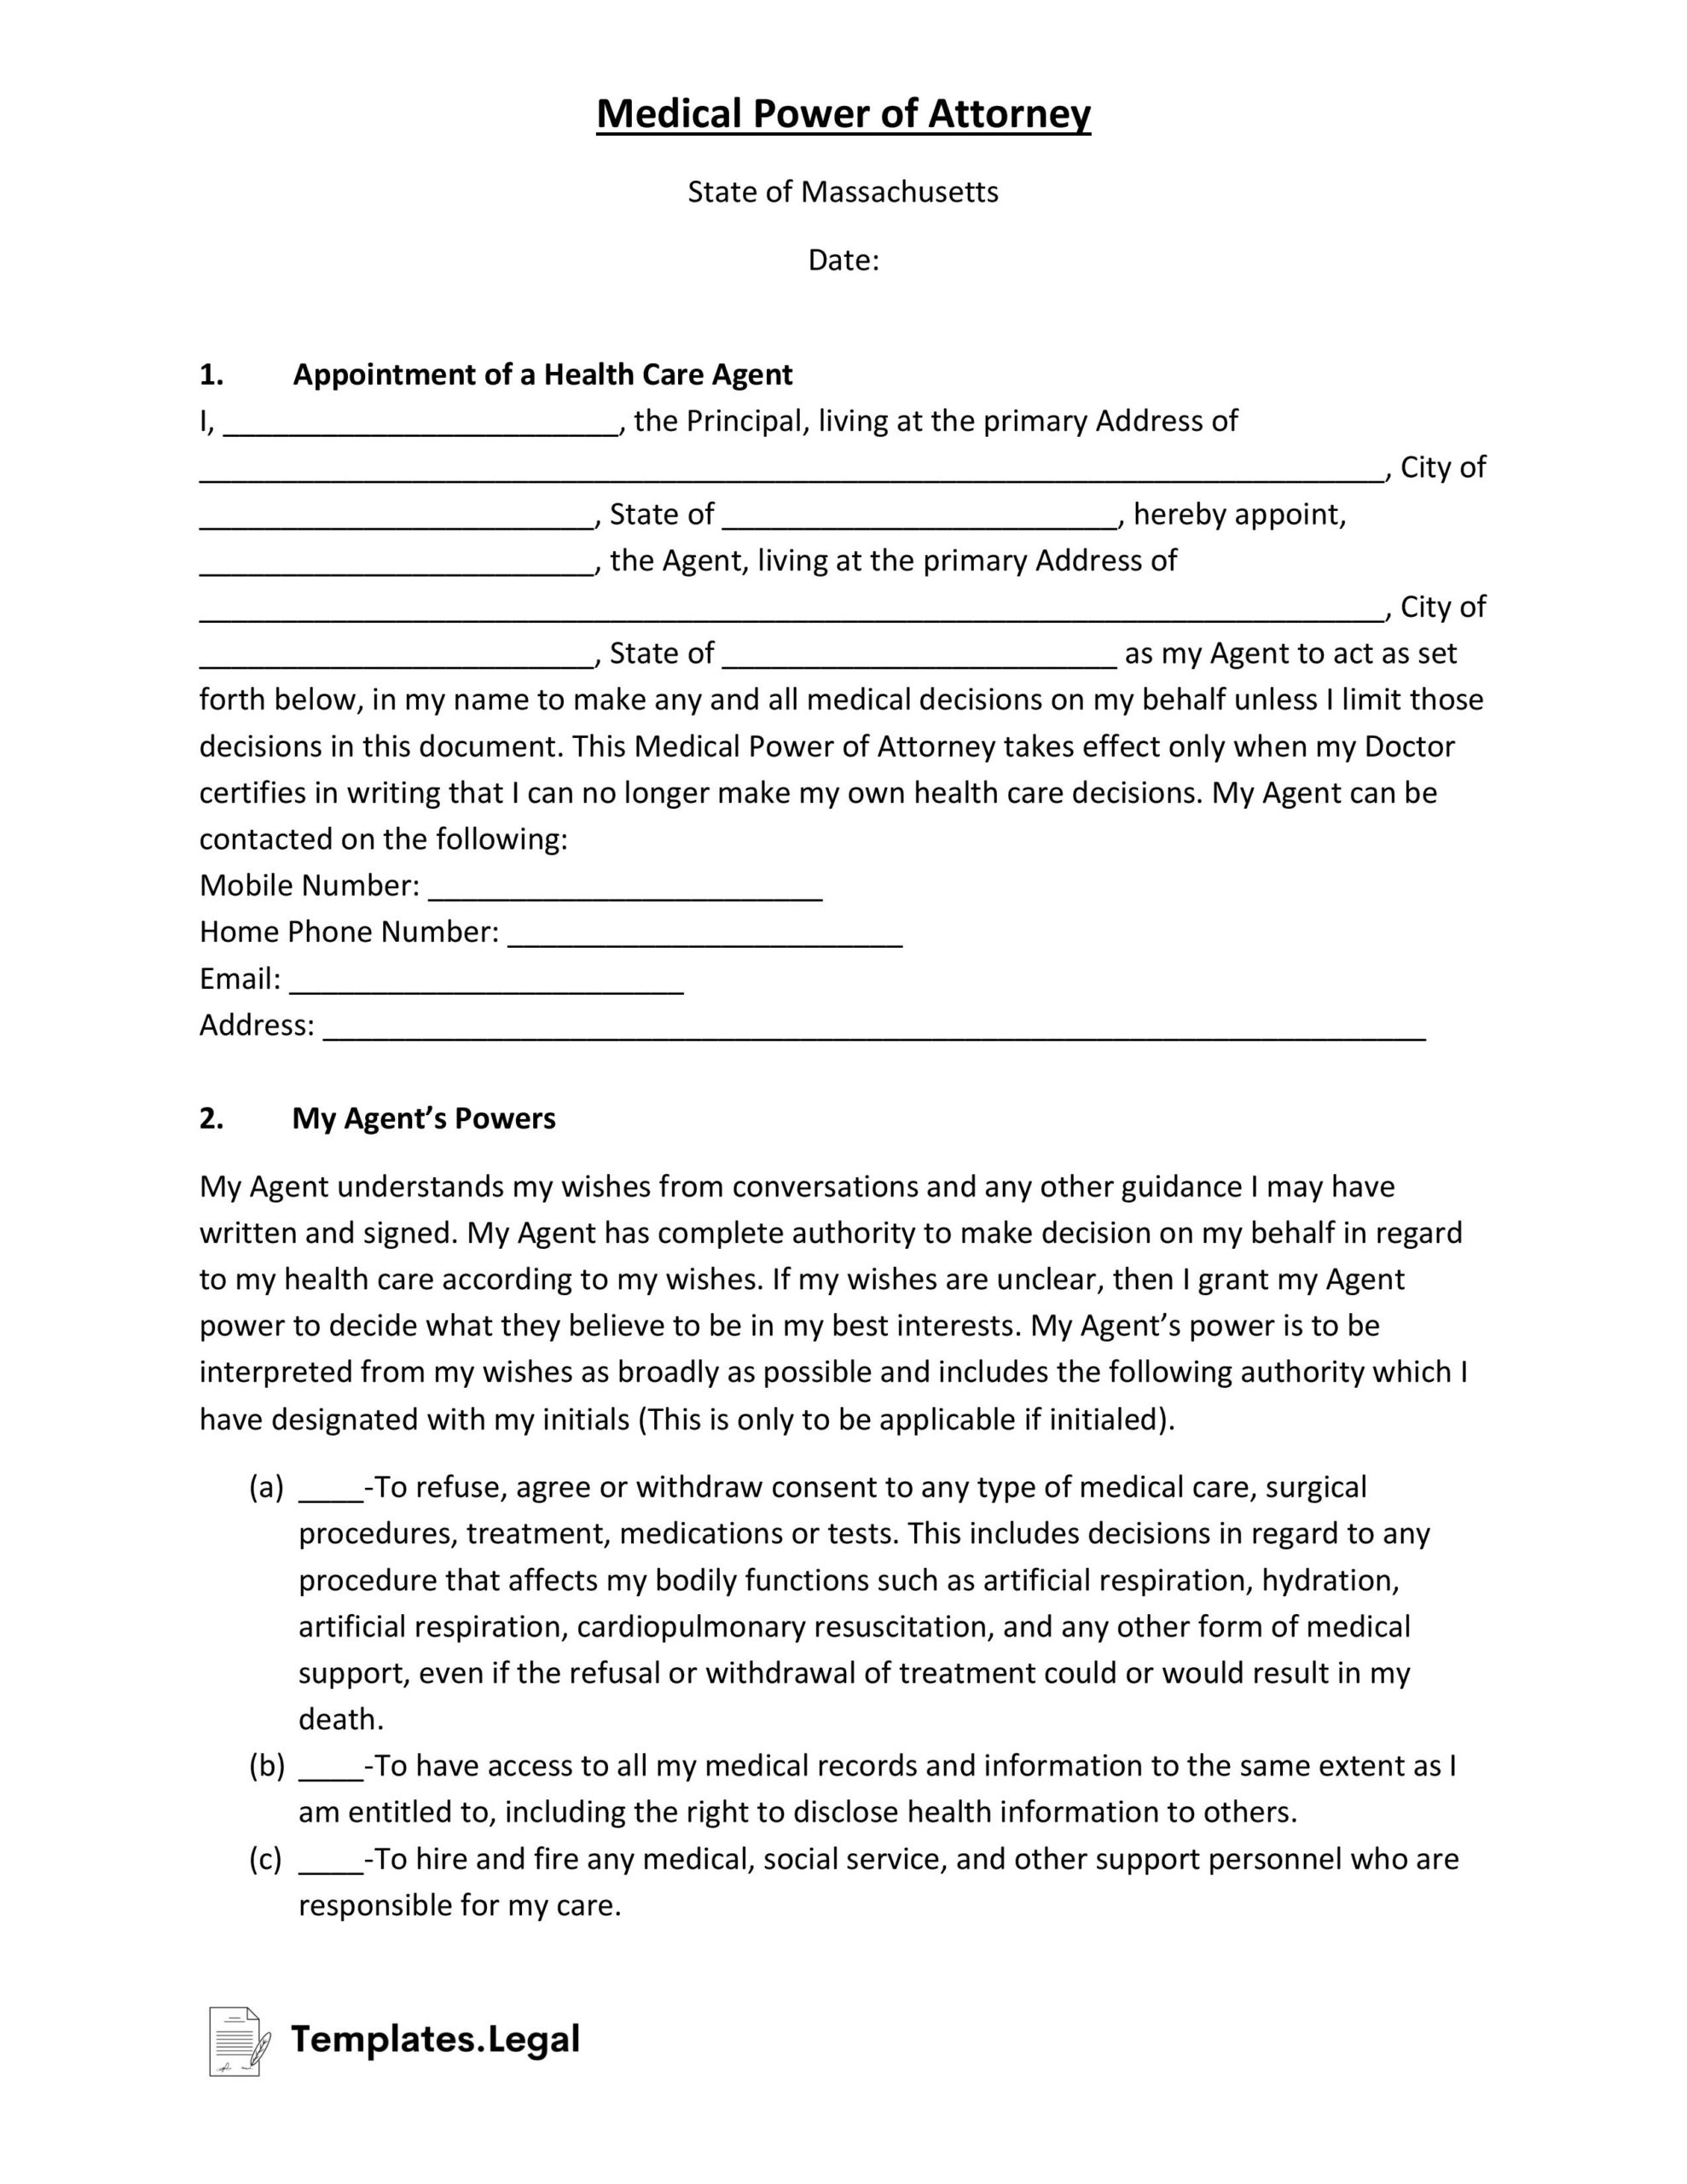 Massachusetts Medical Power of Attorney- Templates.Legal